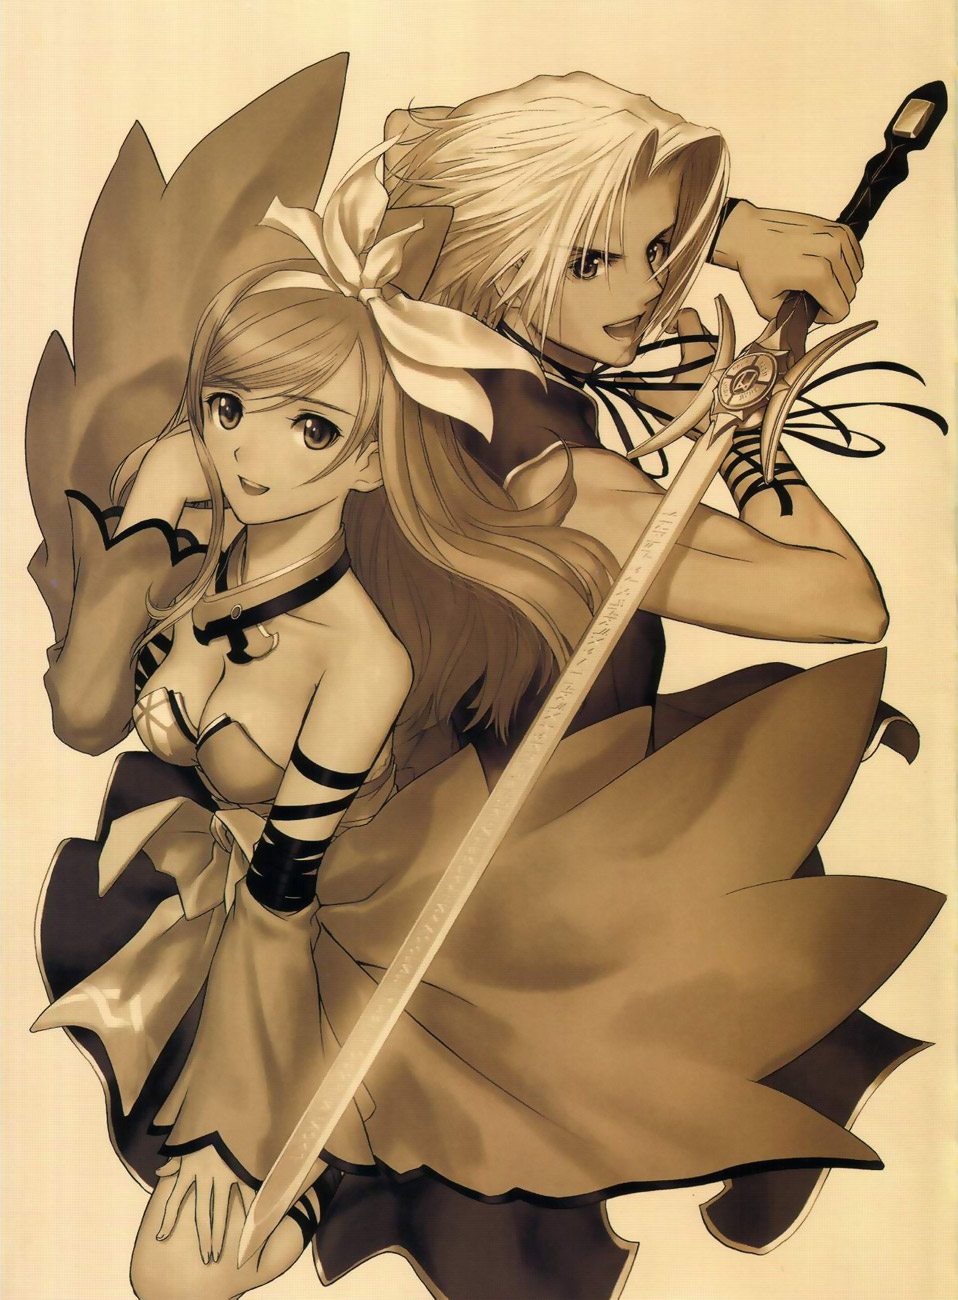 Shining Wind: Collection of visual materials image by Tony Taka